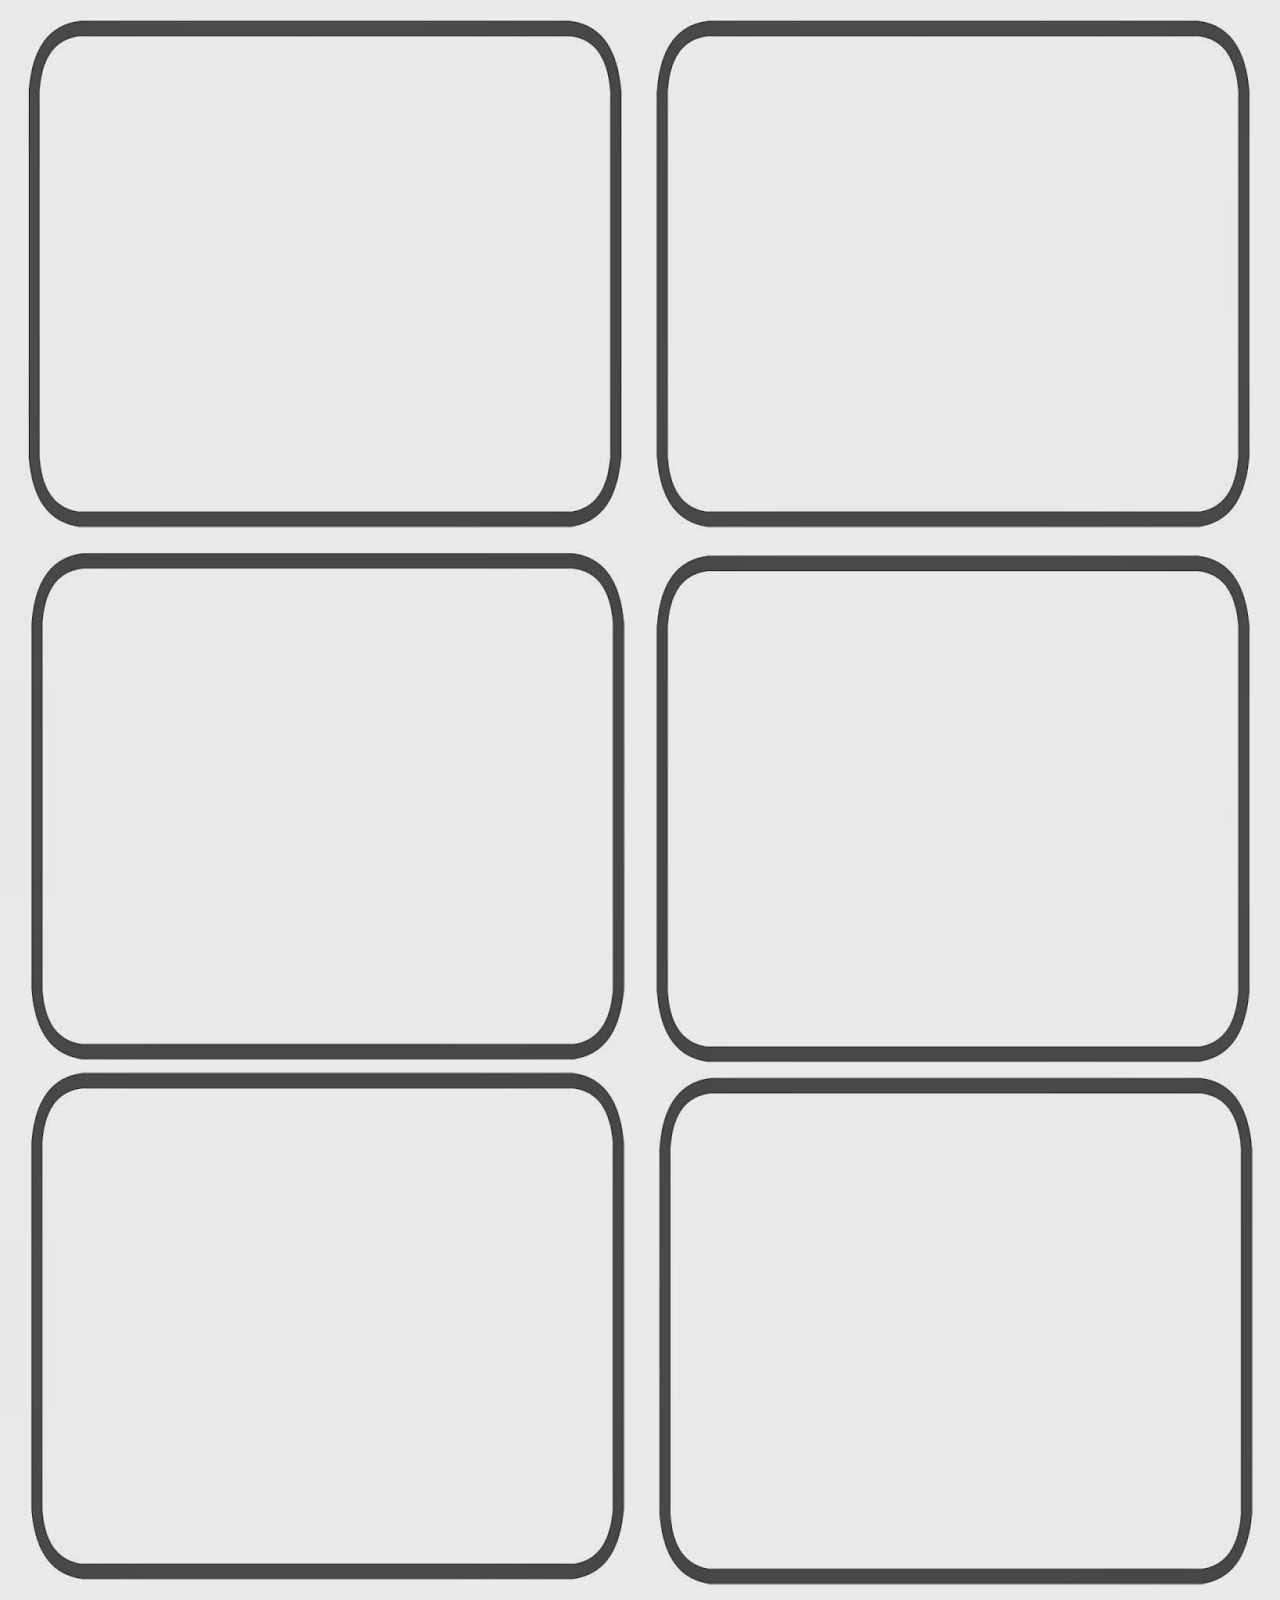 template-for-game-cards